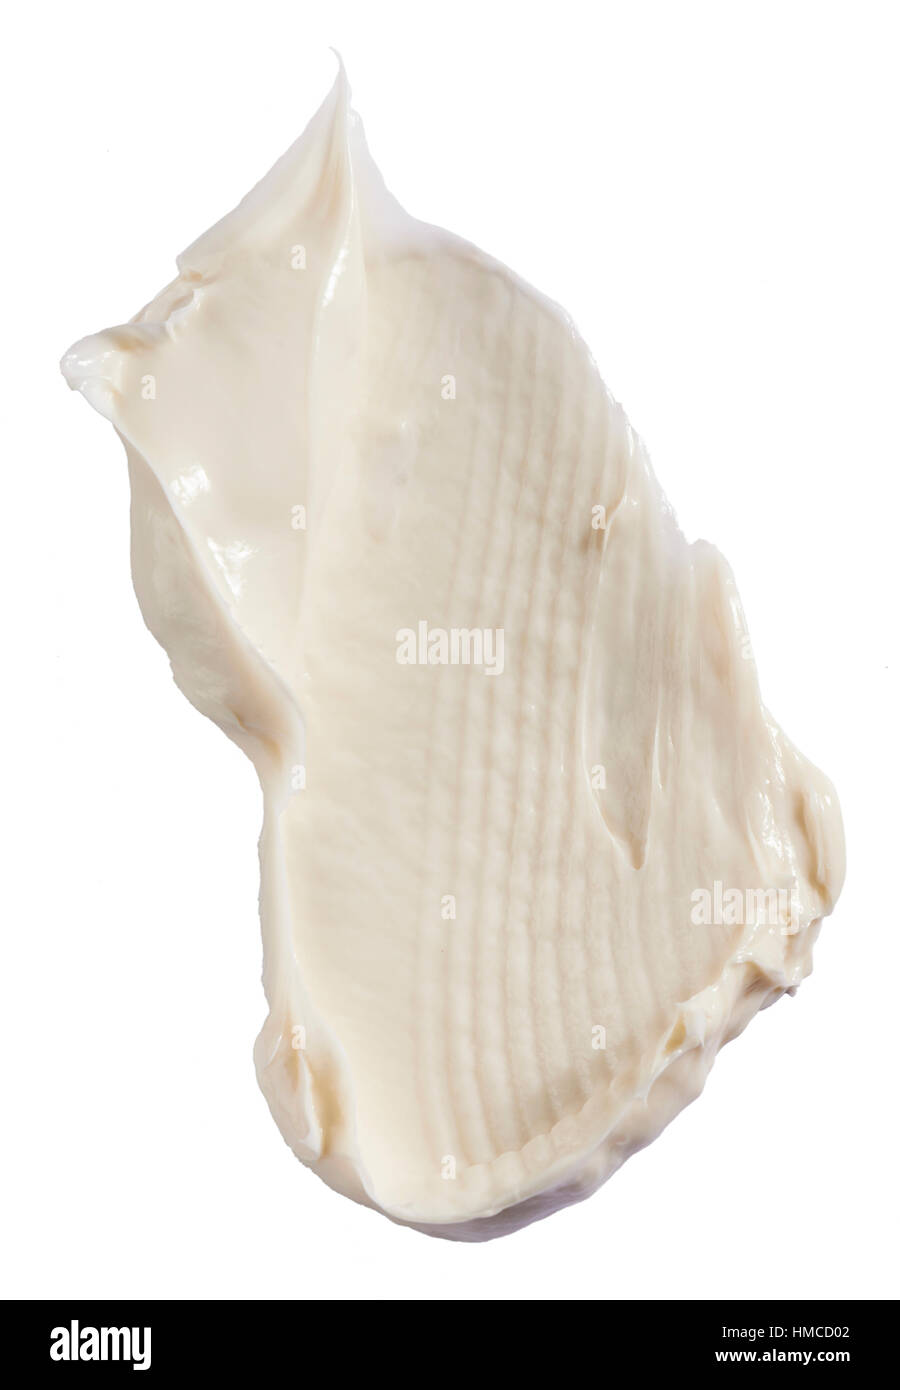 A cut out beauty image of a sample of white face or moisturiser cream Stock Photo